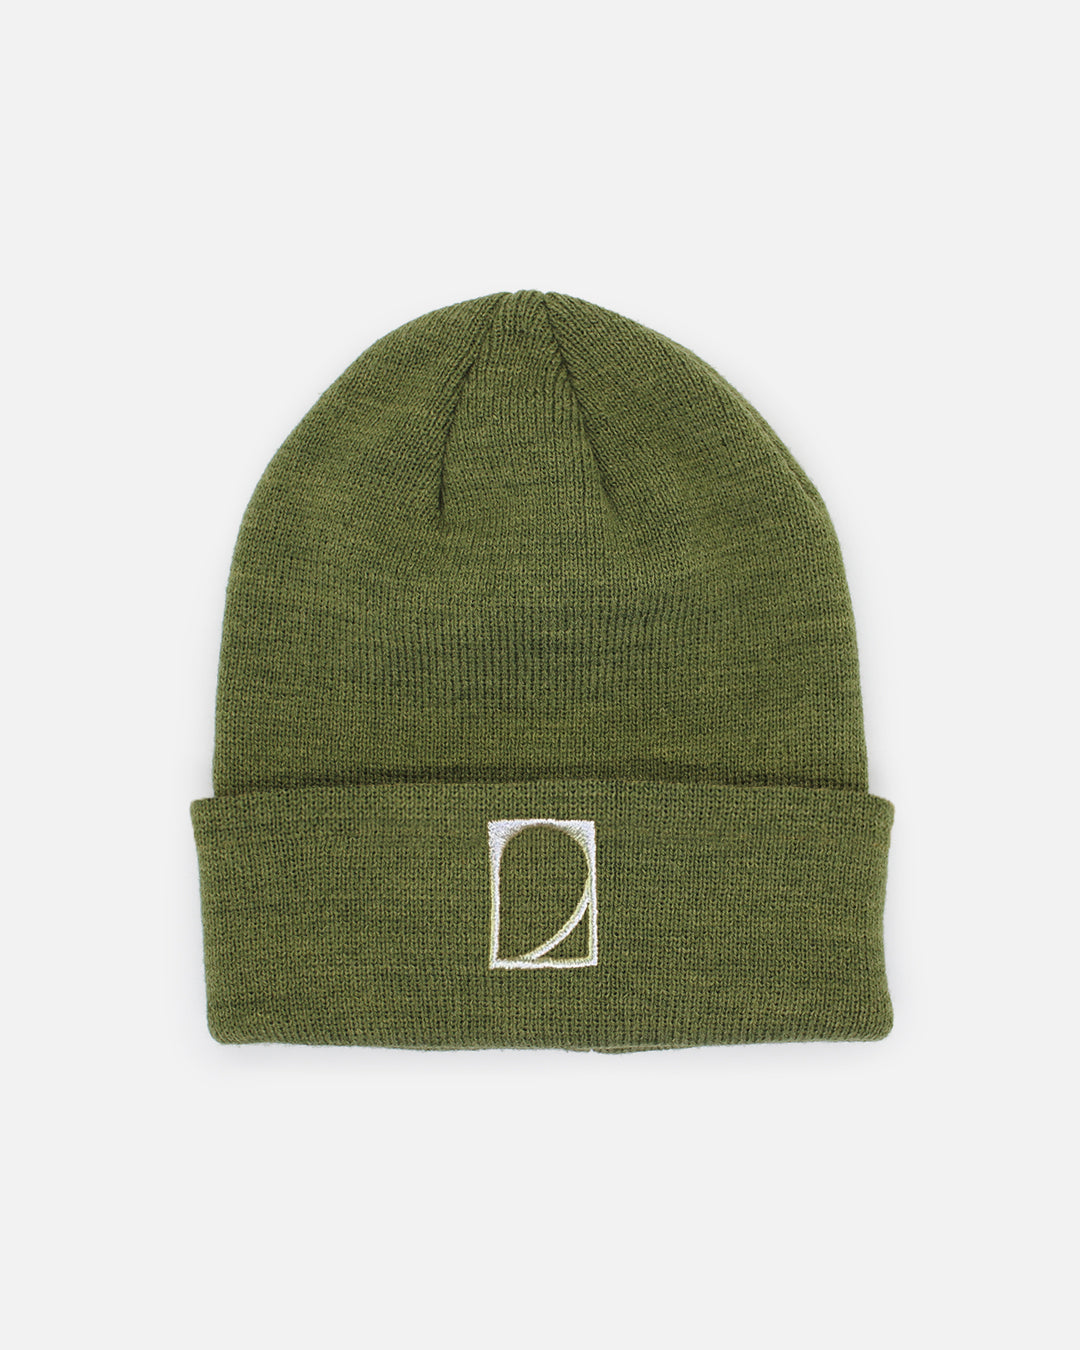 green beanie made with recycled plastic polyester